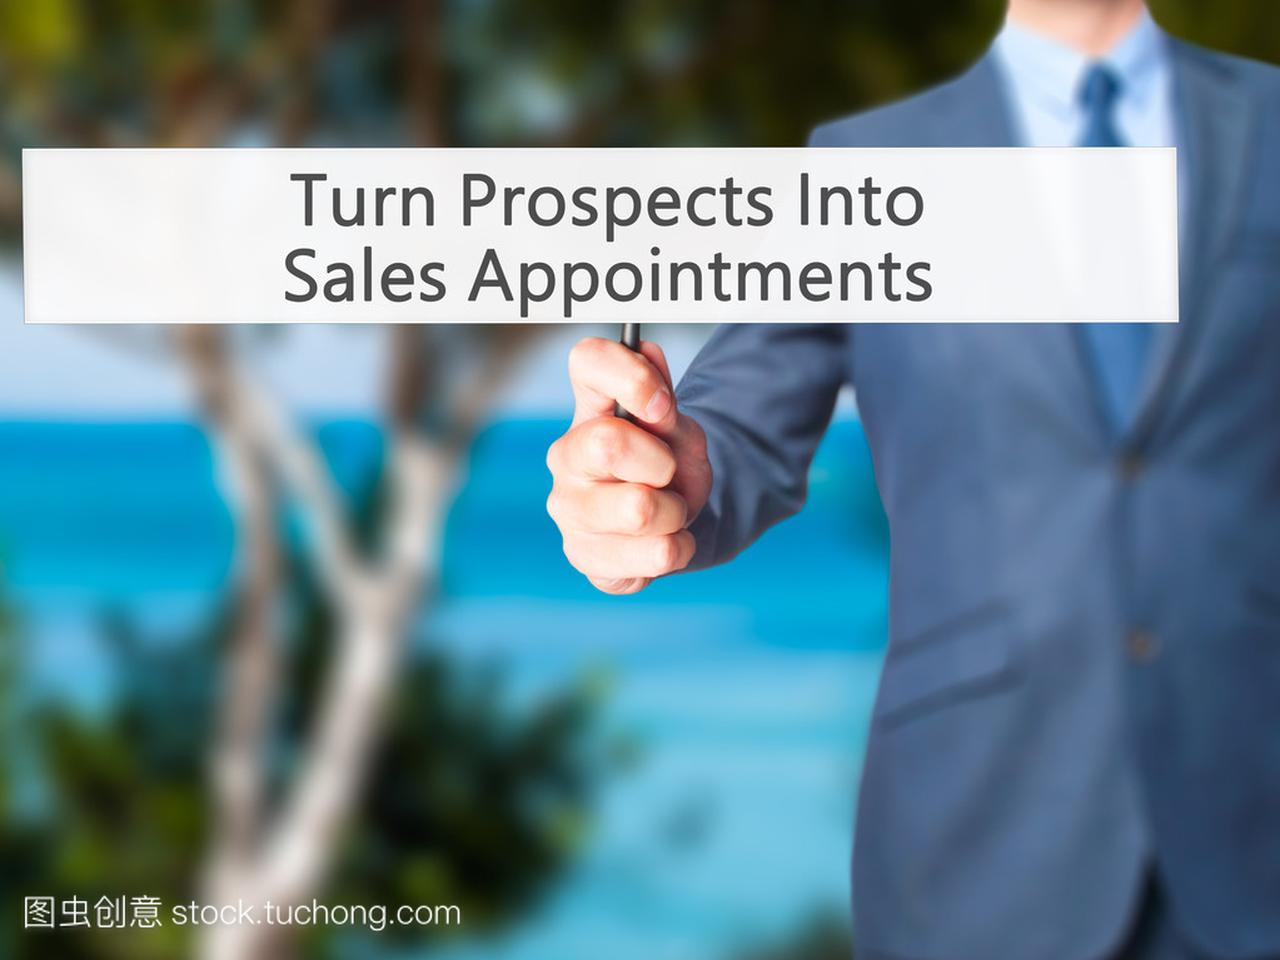 Turn Prospects Into Sales Appointments - Busi